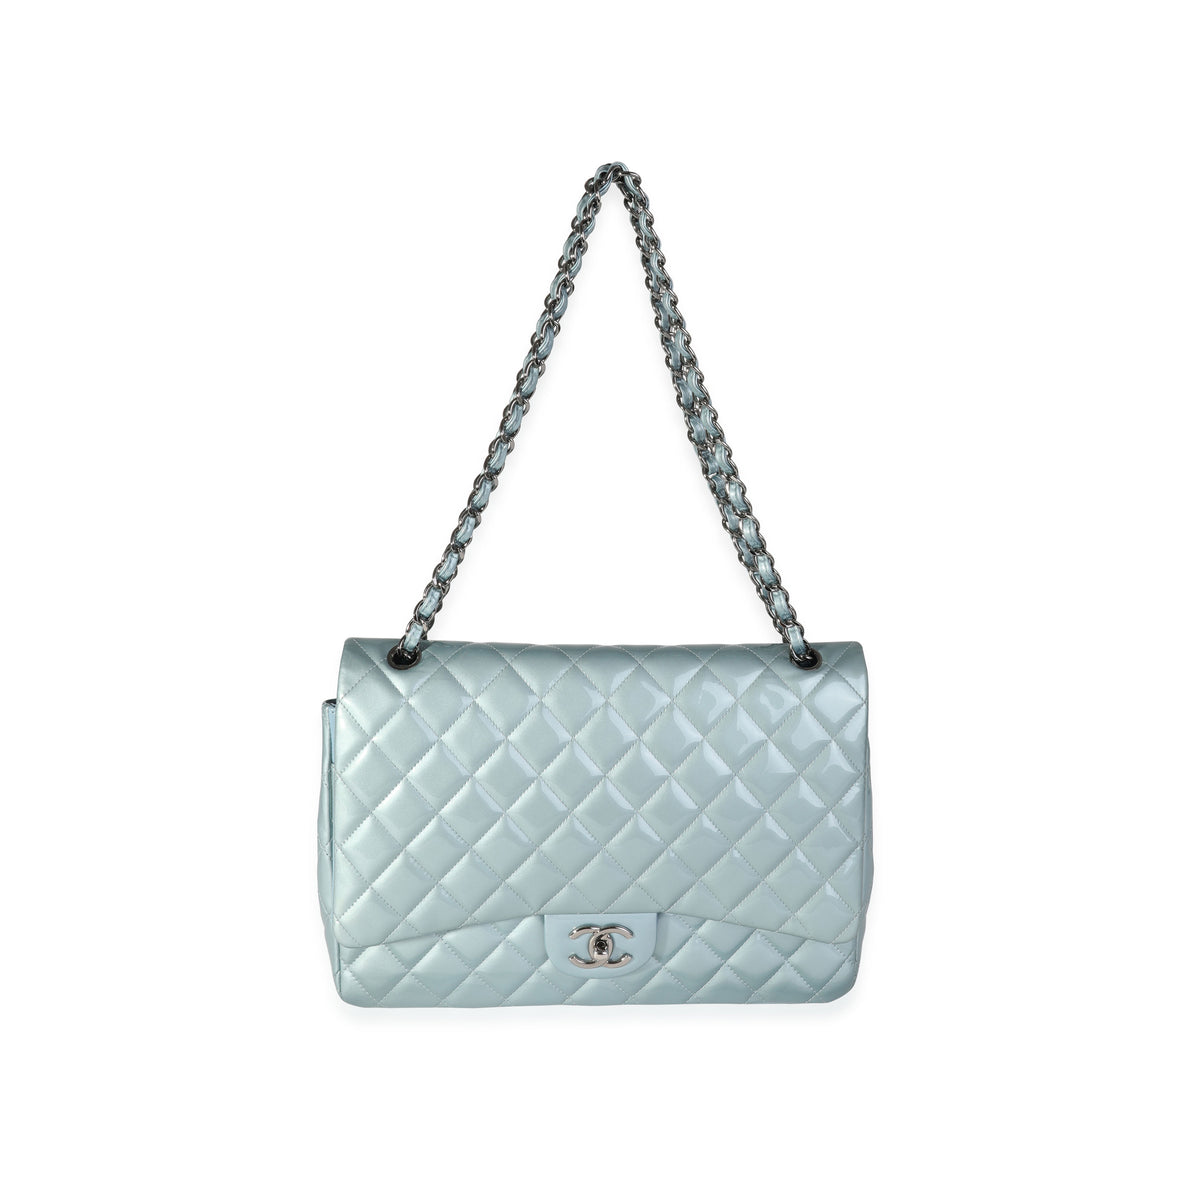 Chanel Light Blue Quilted Patent Leather Medium Classic Double